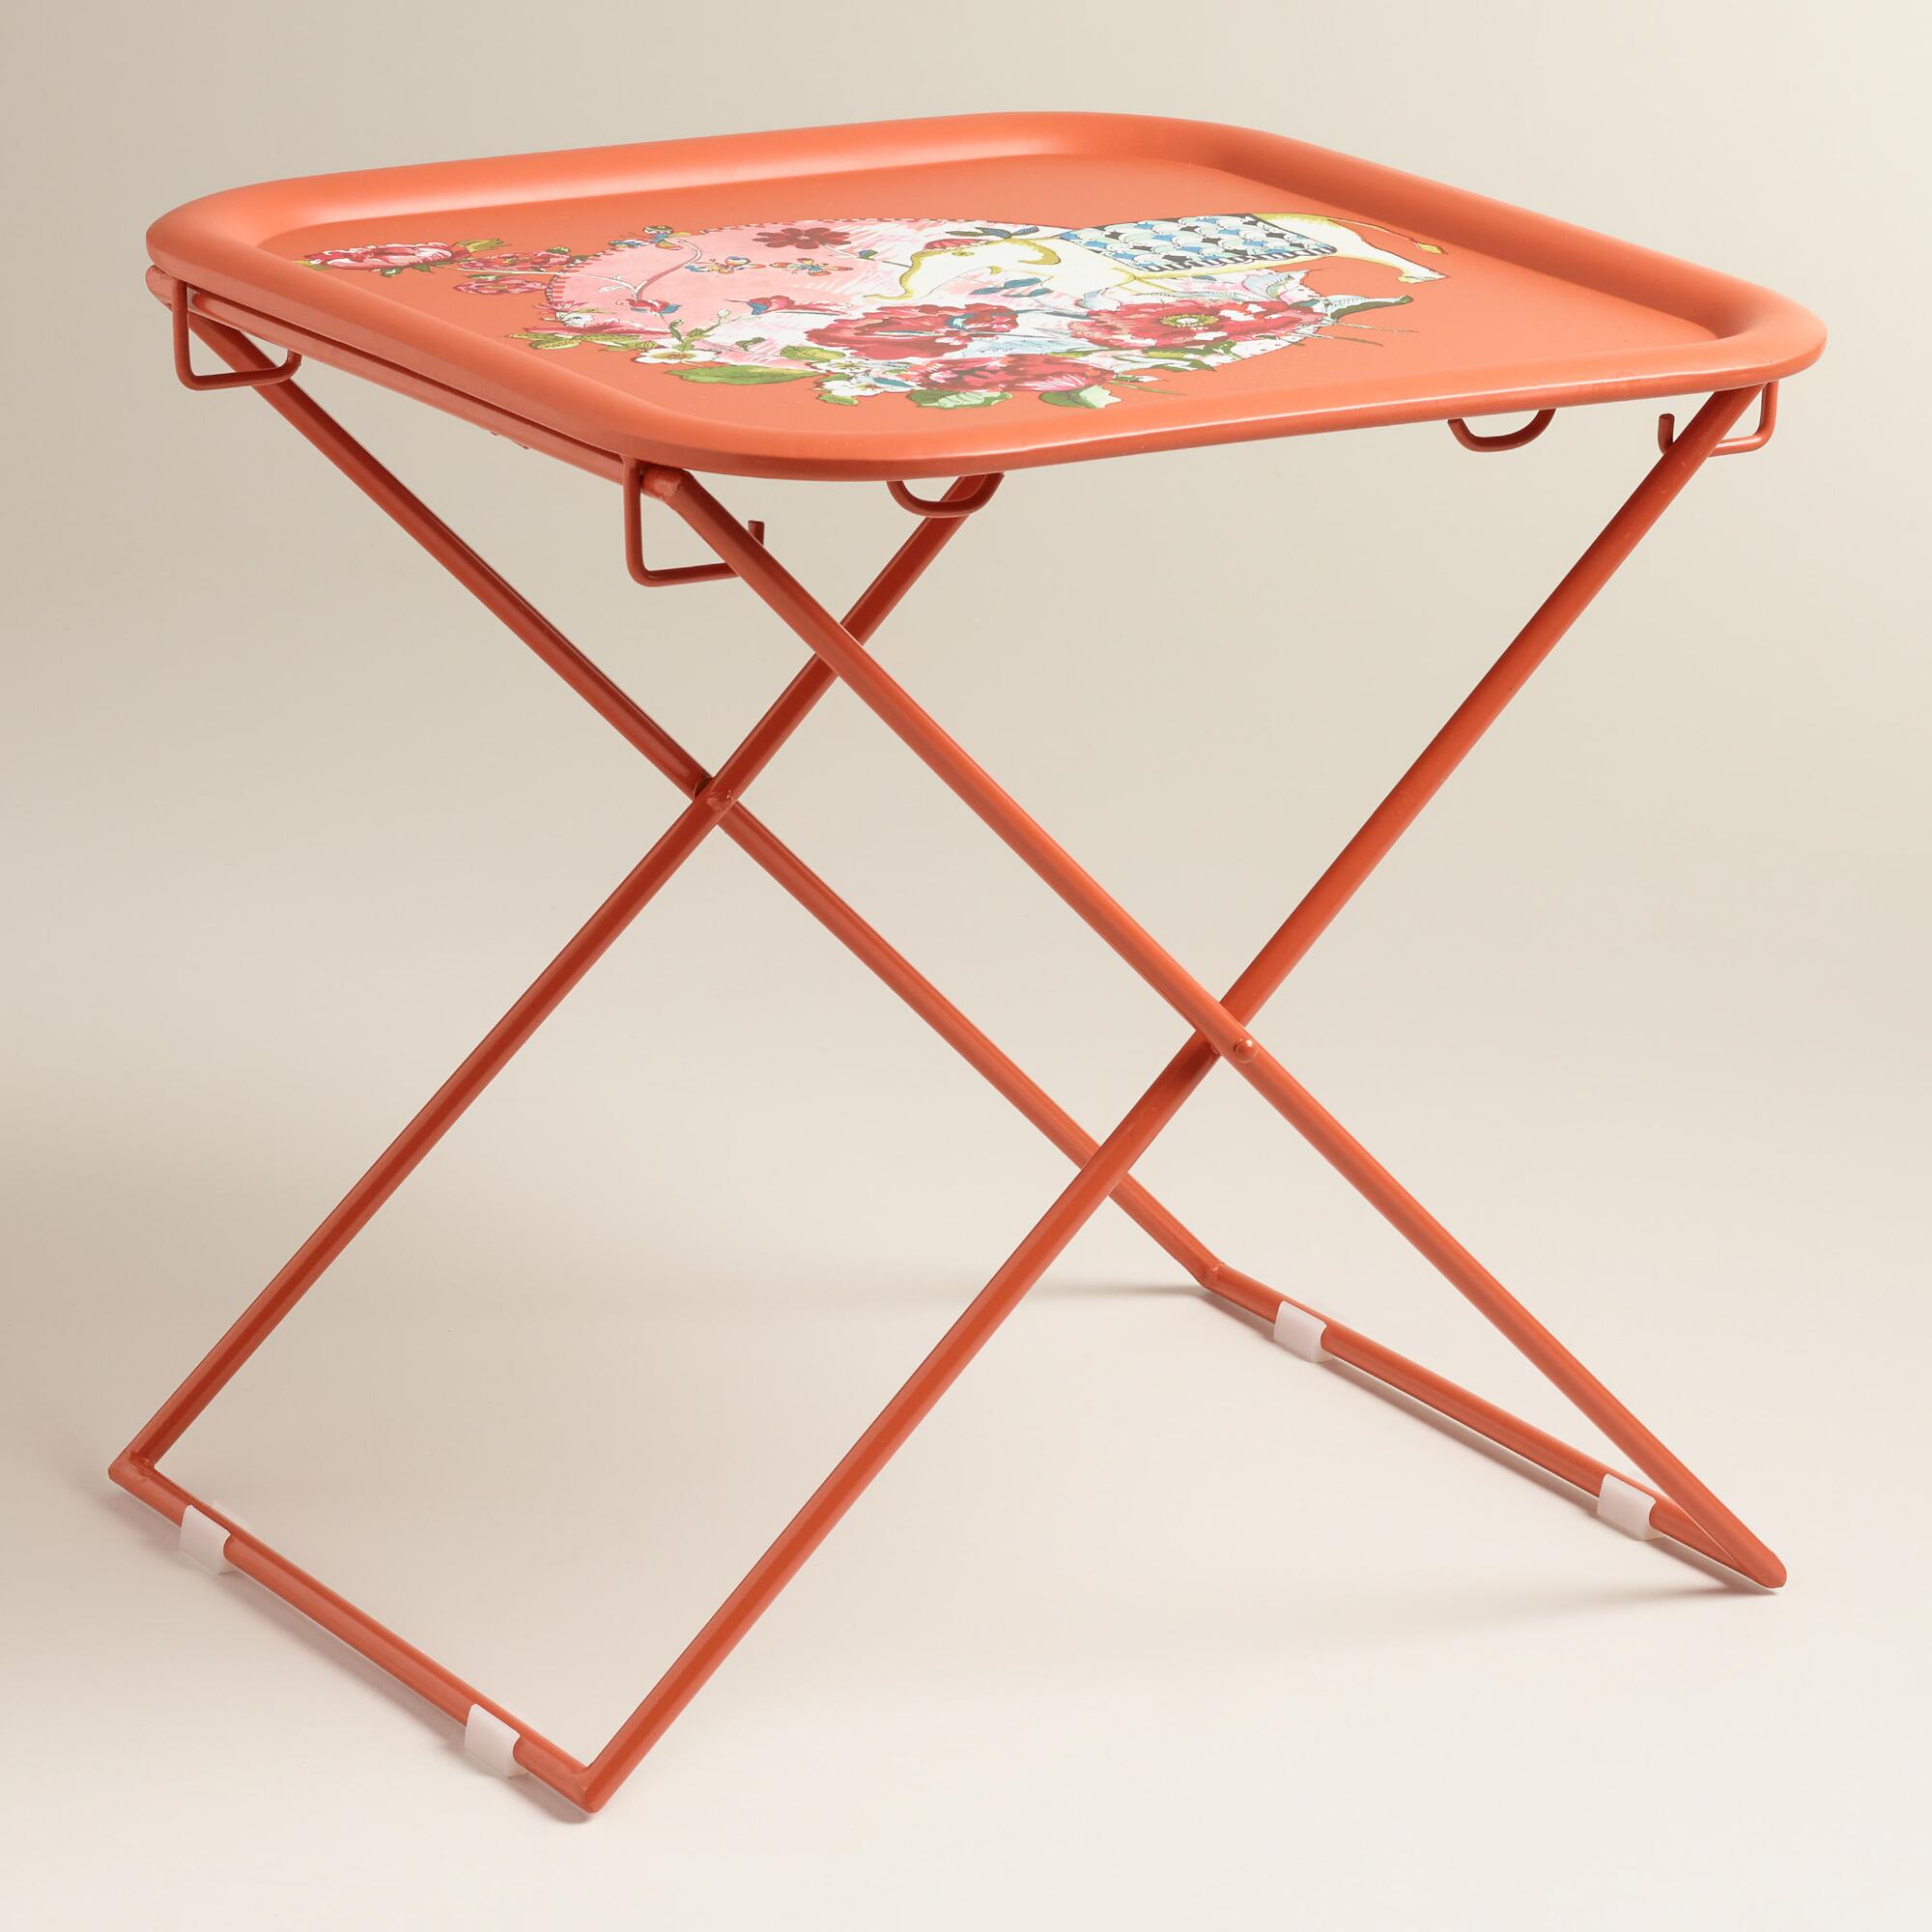 orange square metal accent table world market drum outdoor burnt xmas tablecloth living room cupboard decorative trunks chrome and glass end tables vintage home wall decor natural